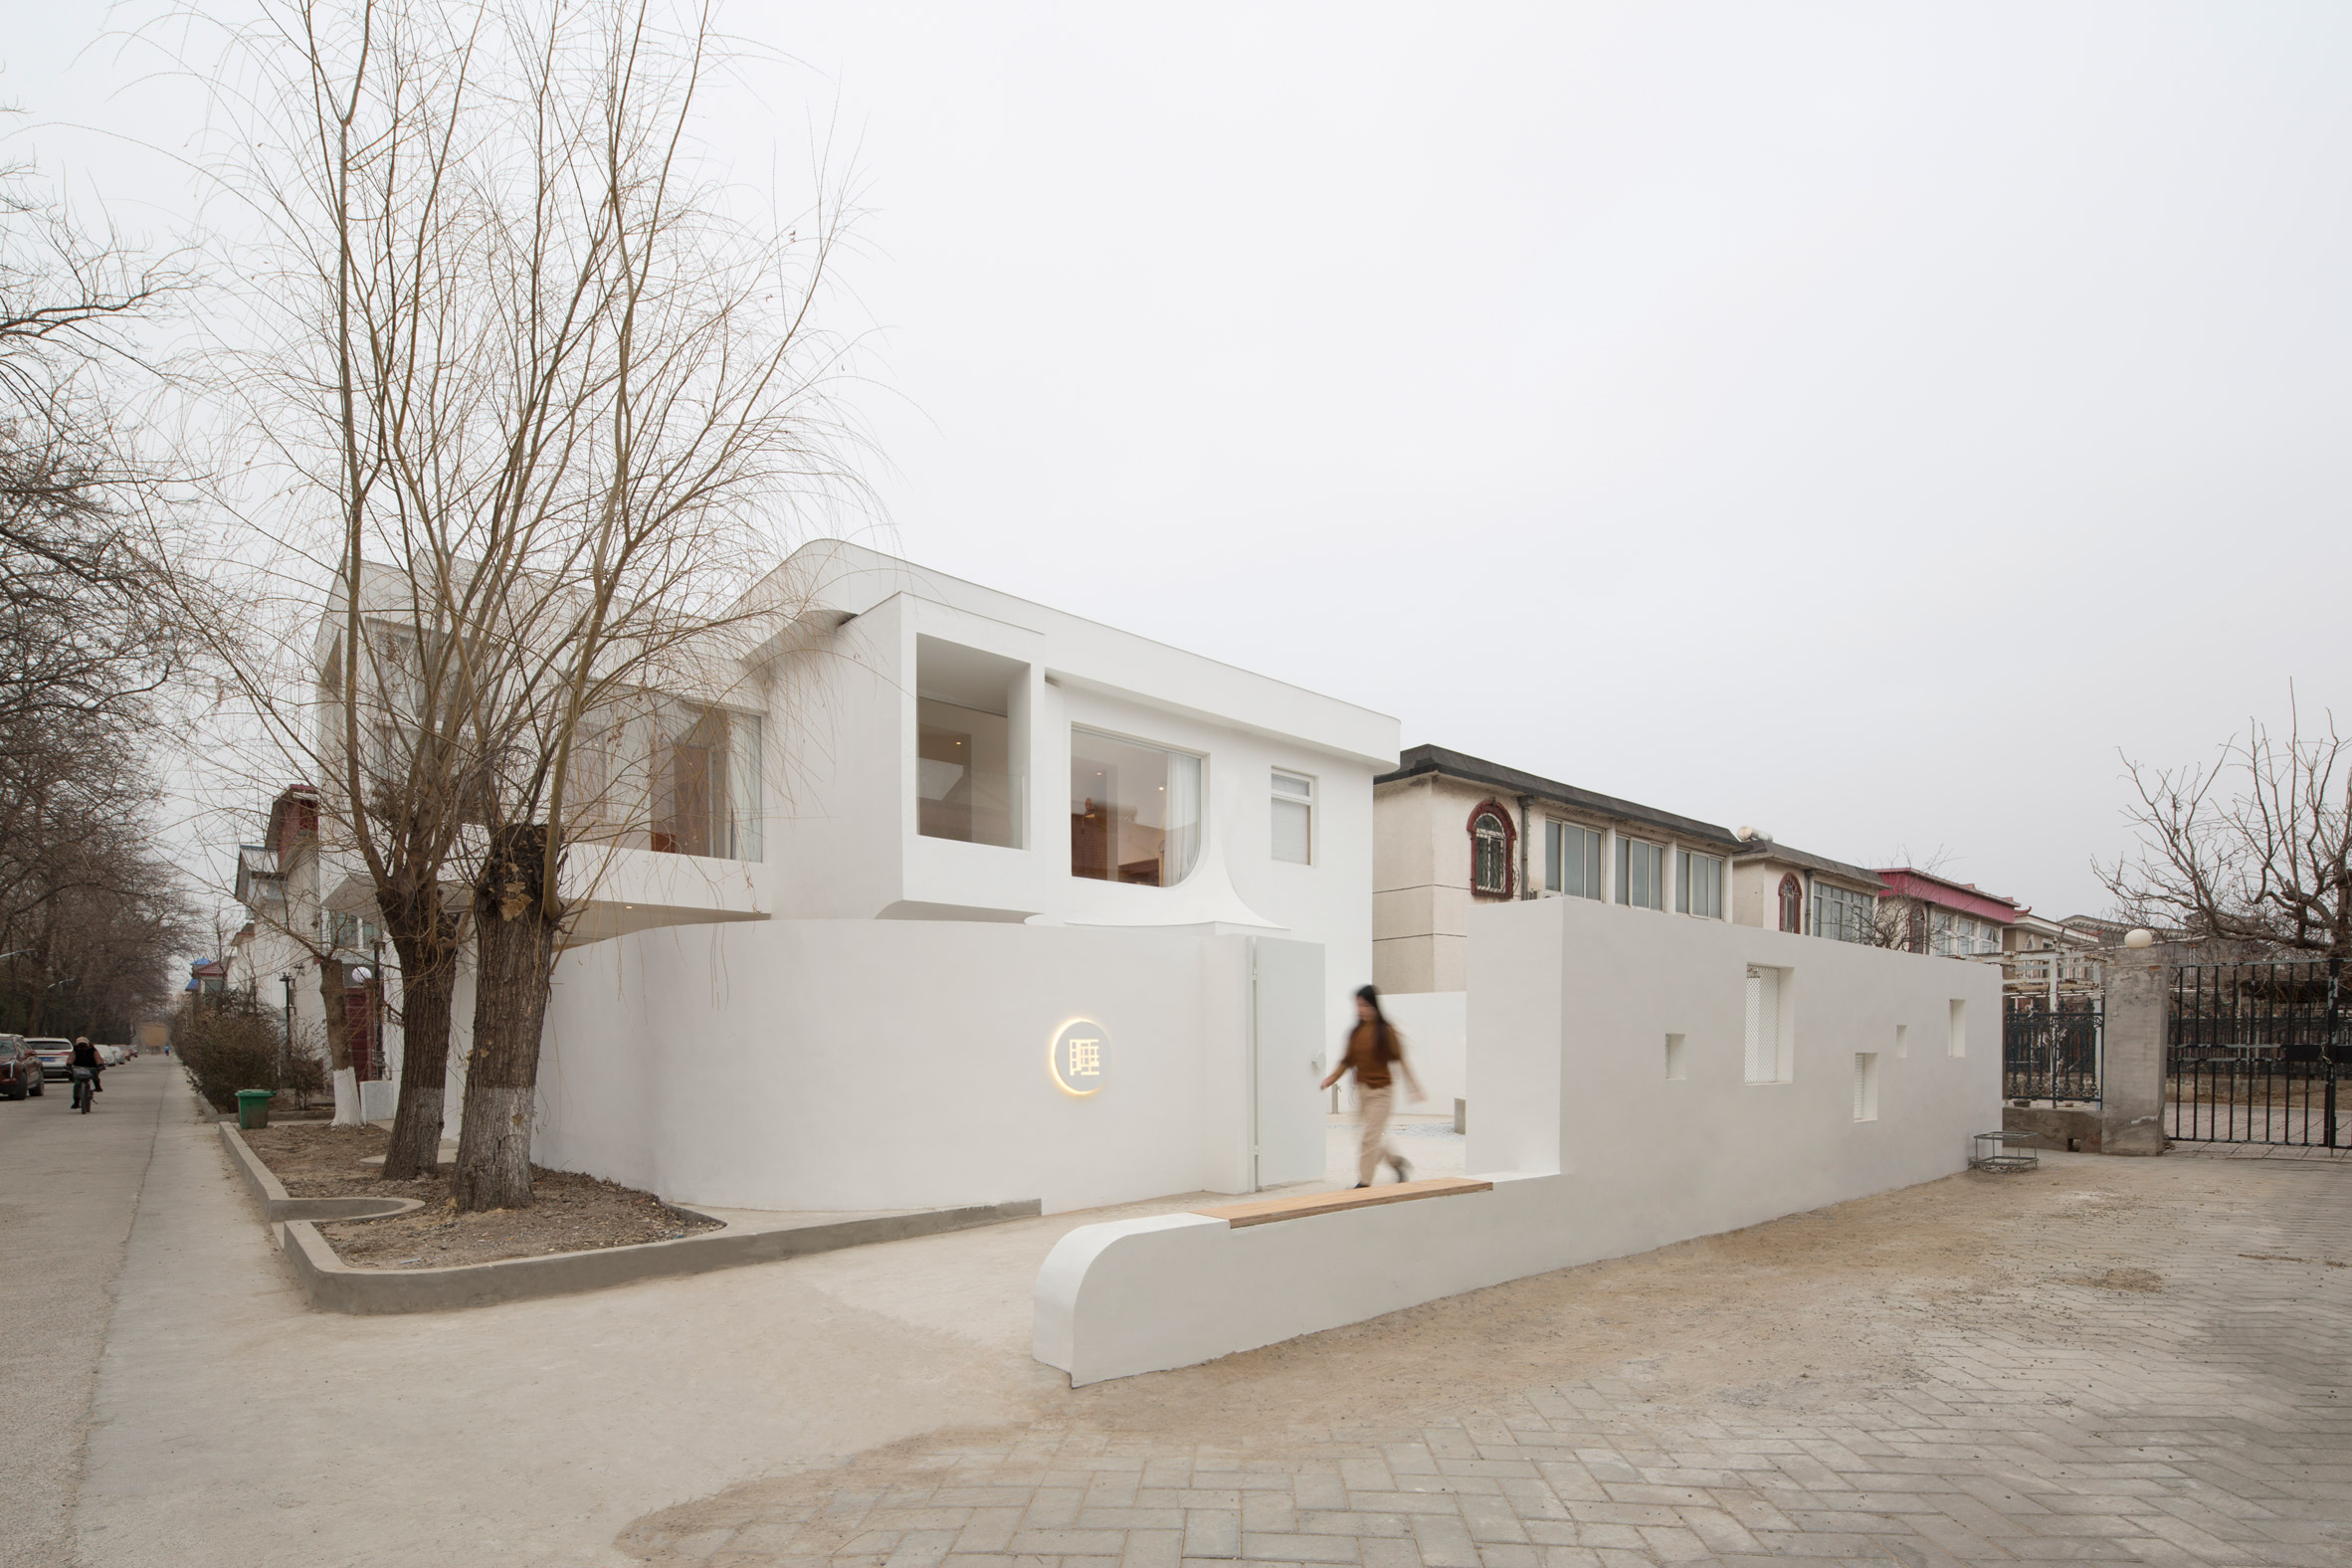 Exterior of the Sleeping Lab hotel by Atelier d'More